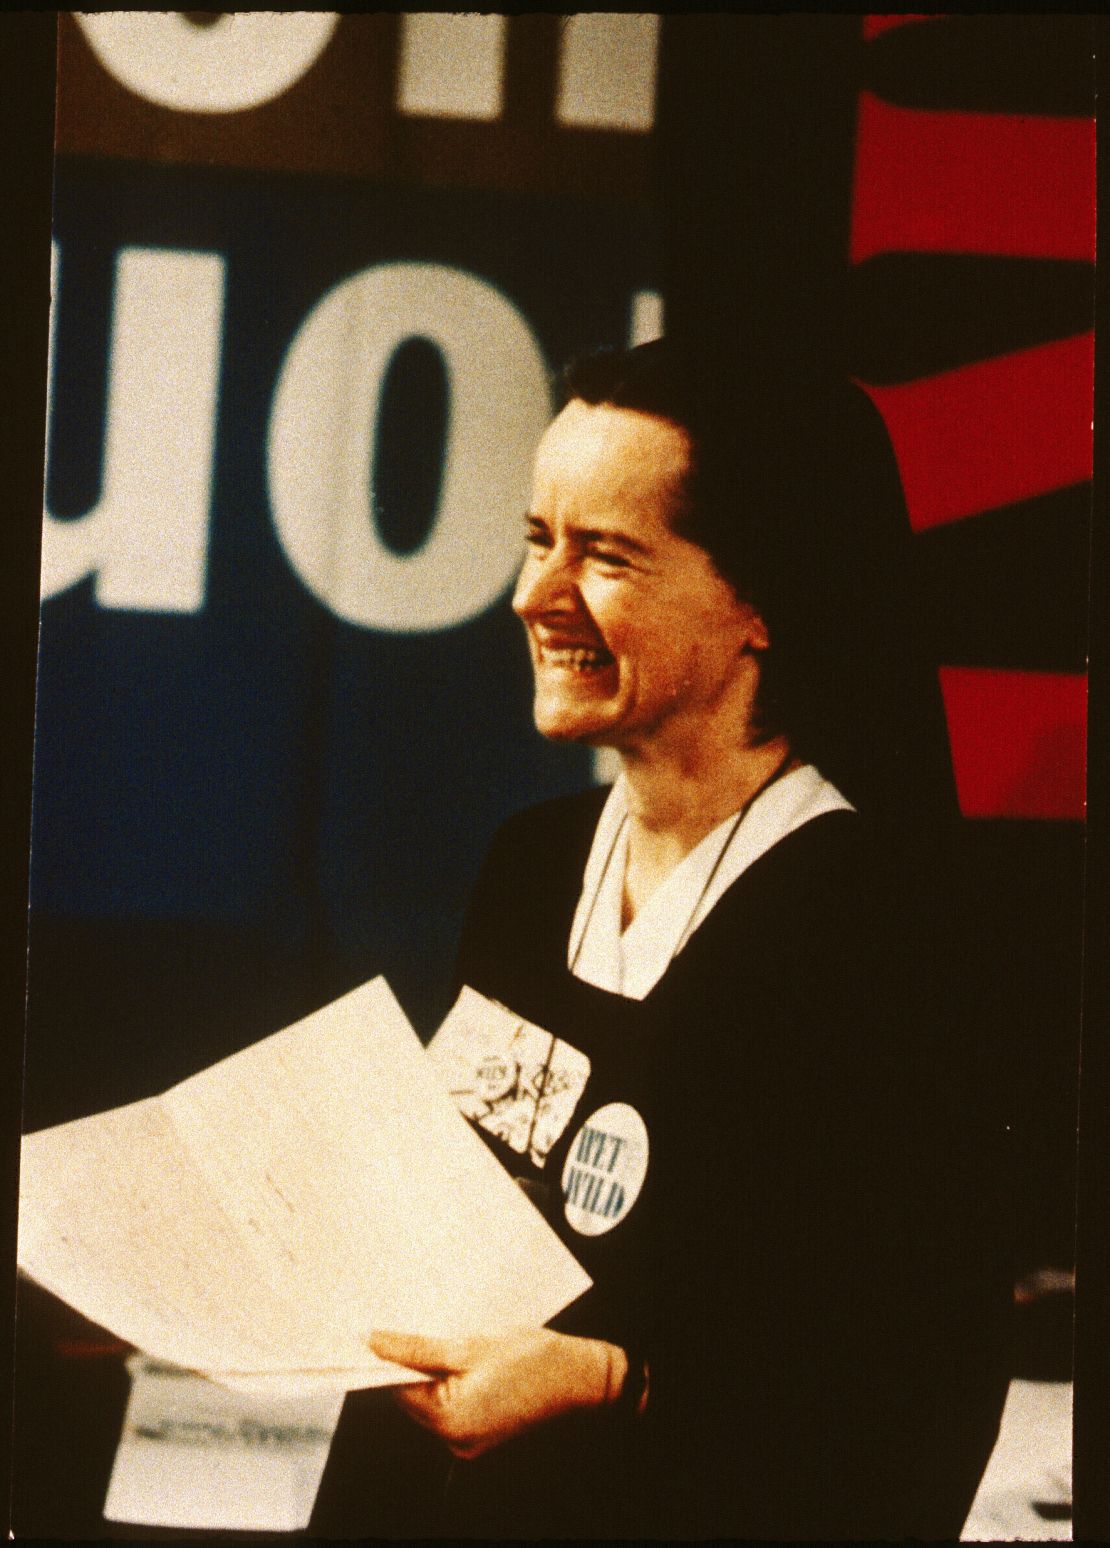 Corita Kent pictured at a conference in the late 1960s.